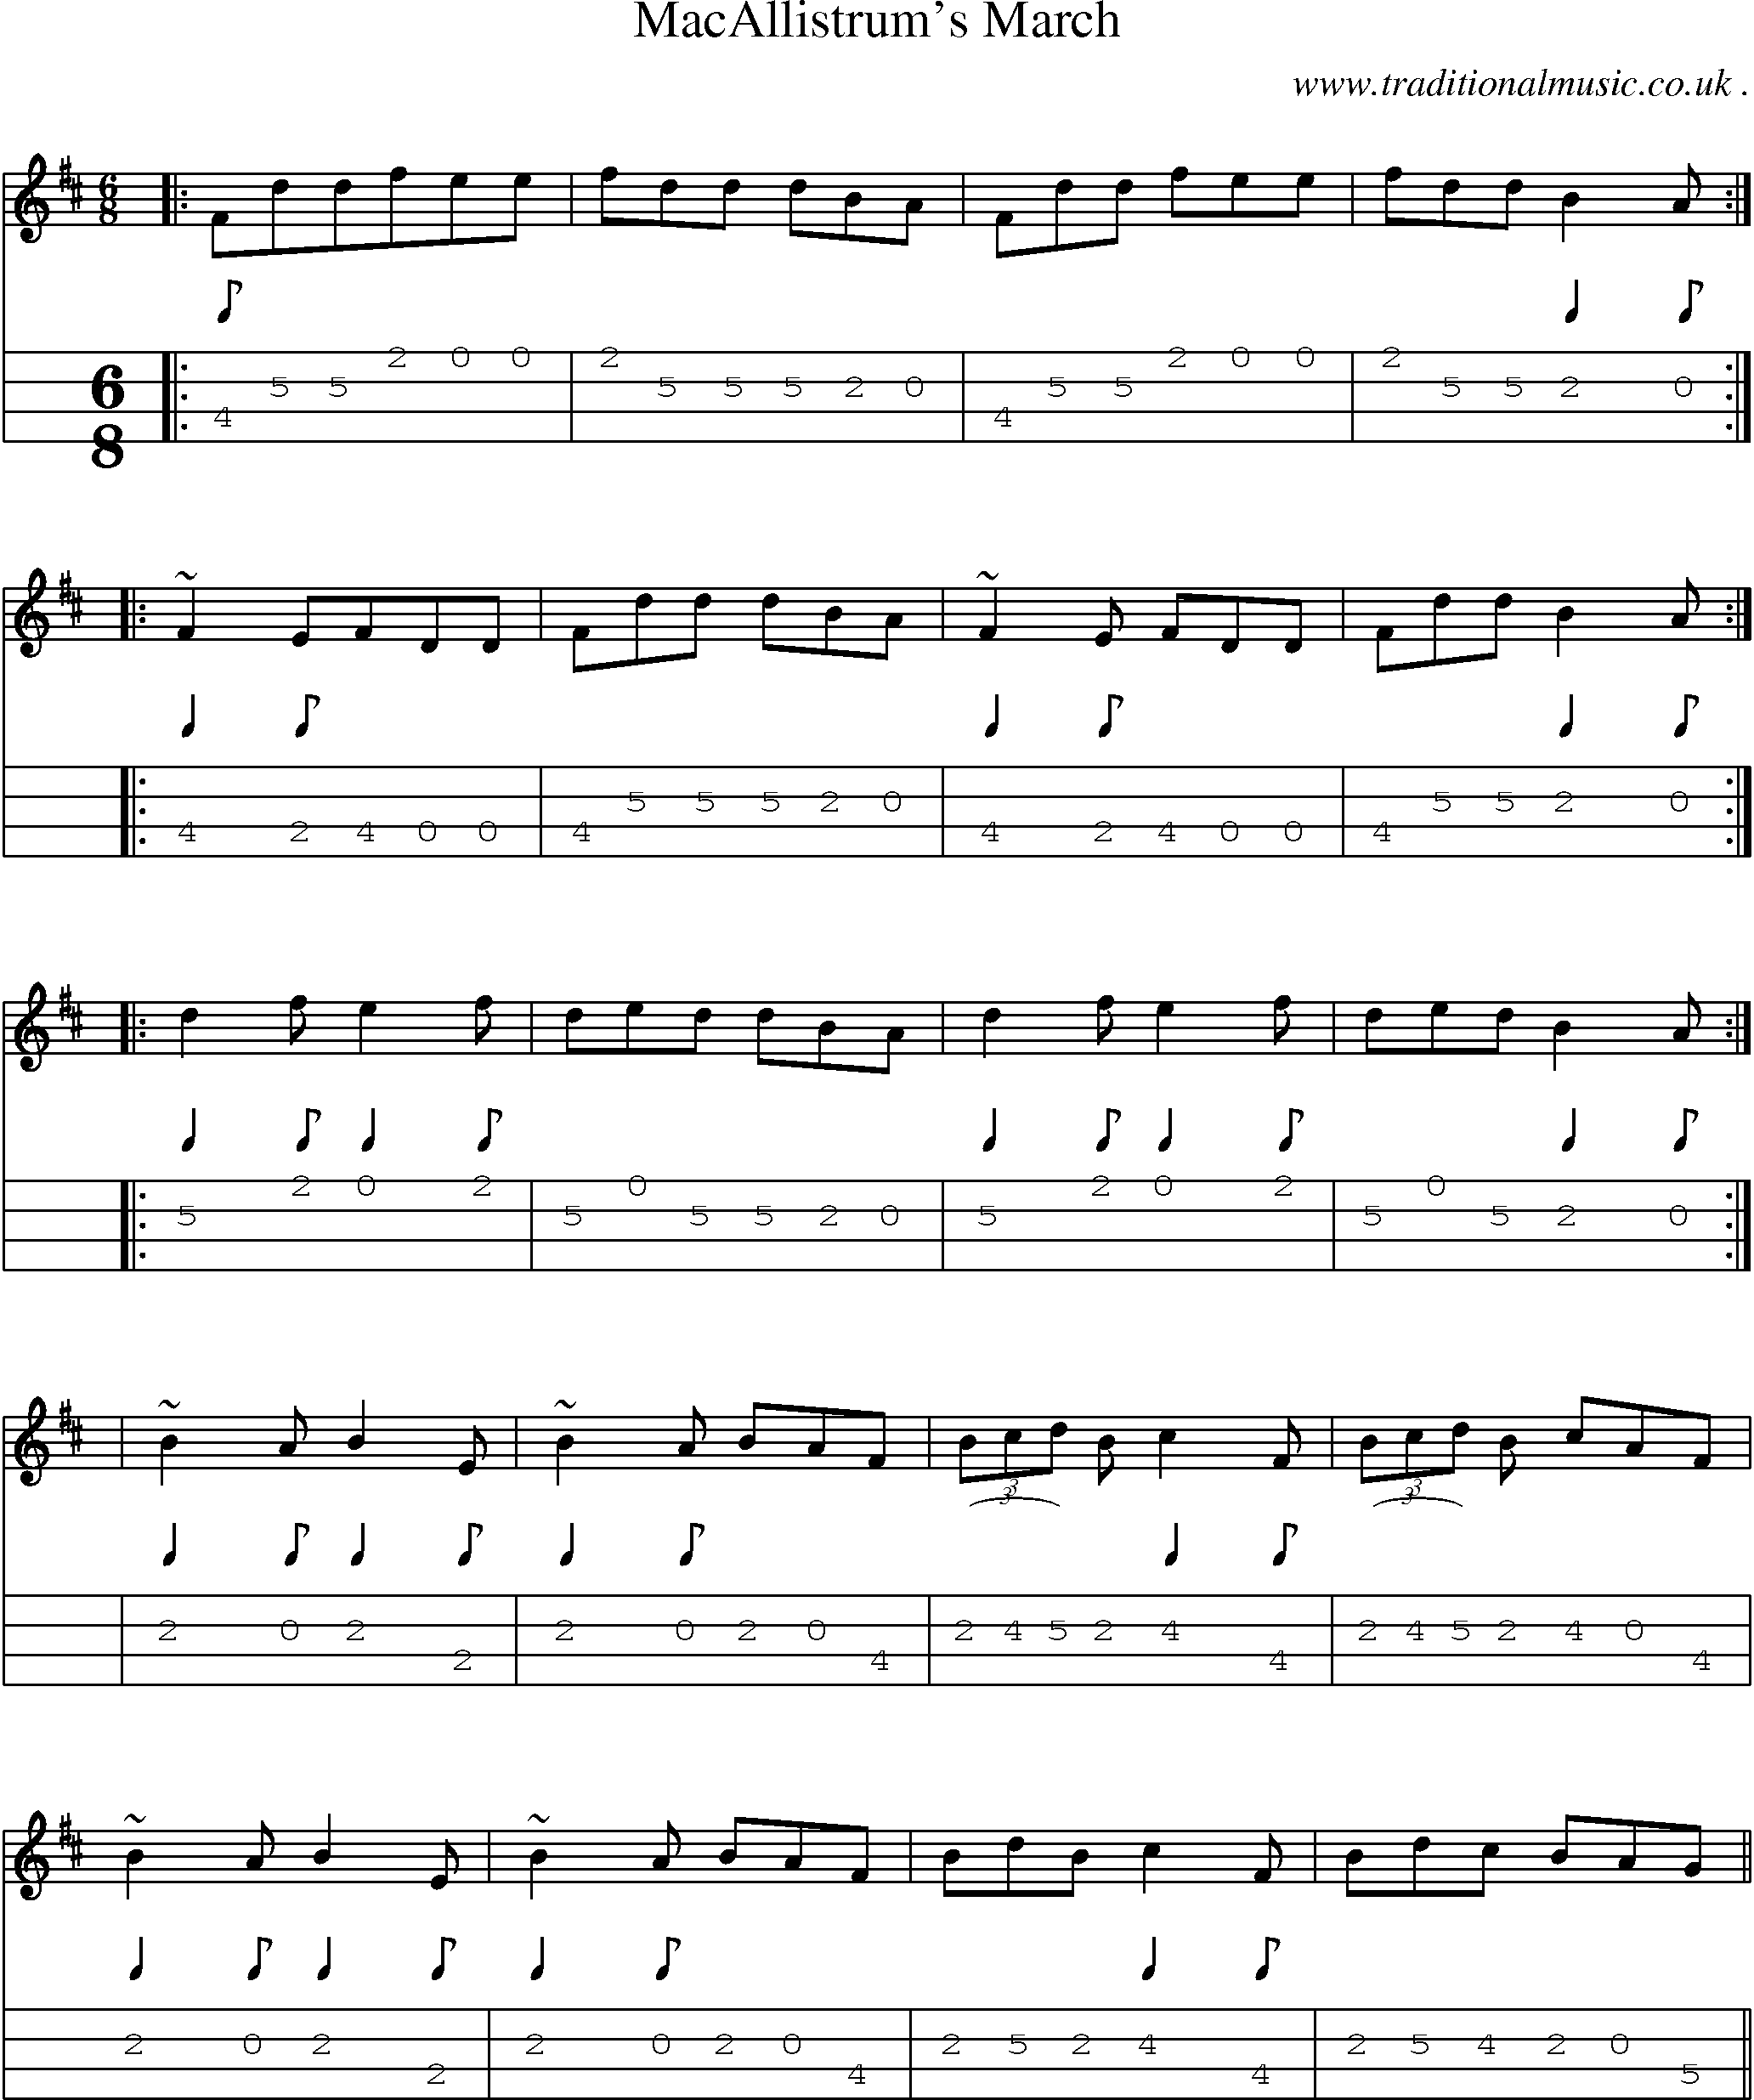 Sheet-music  score, Chords and Mandolin Tabs for Macallistrums March